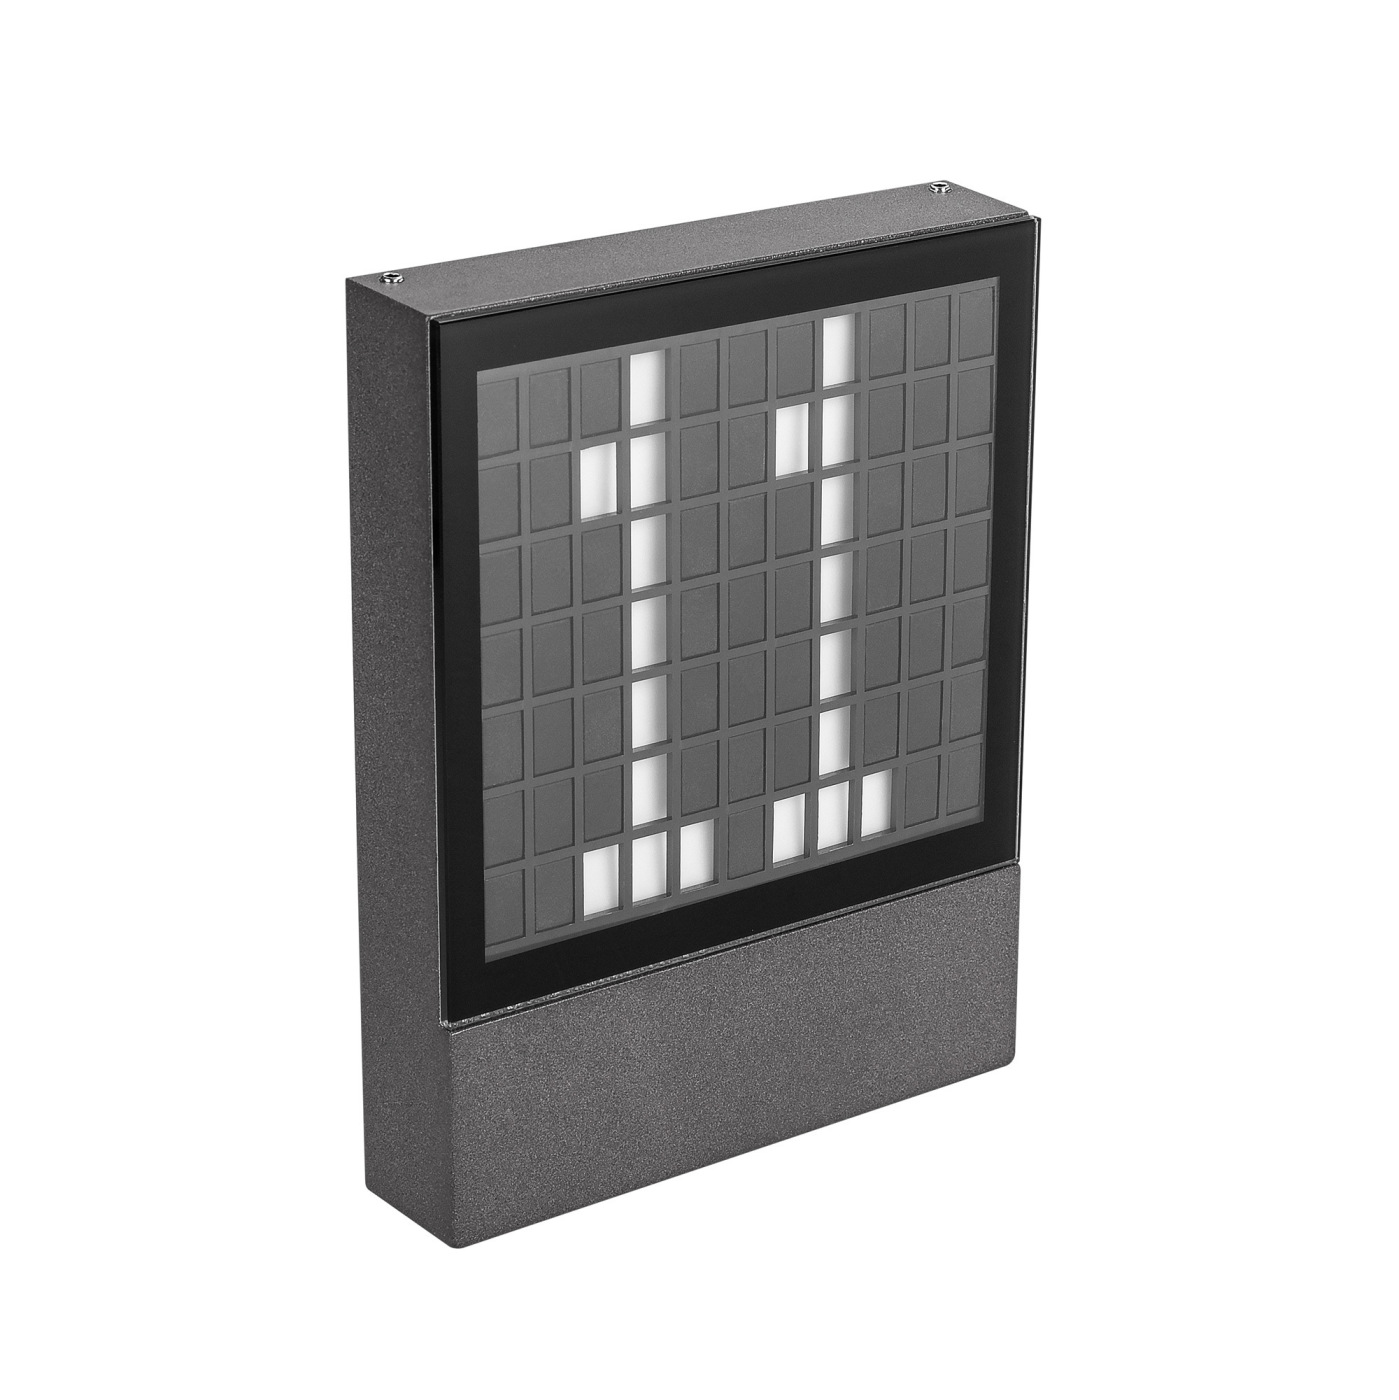 Светильник LGD-SIGN-WALL-S150x200-3W Warm3000 (GR, 148 deg, 230V) (Arlight, IP54 Металл, 3 года) 10 15cm a6 wall mount picture photo display ad frame acrylic sign holder price label holder stand